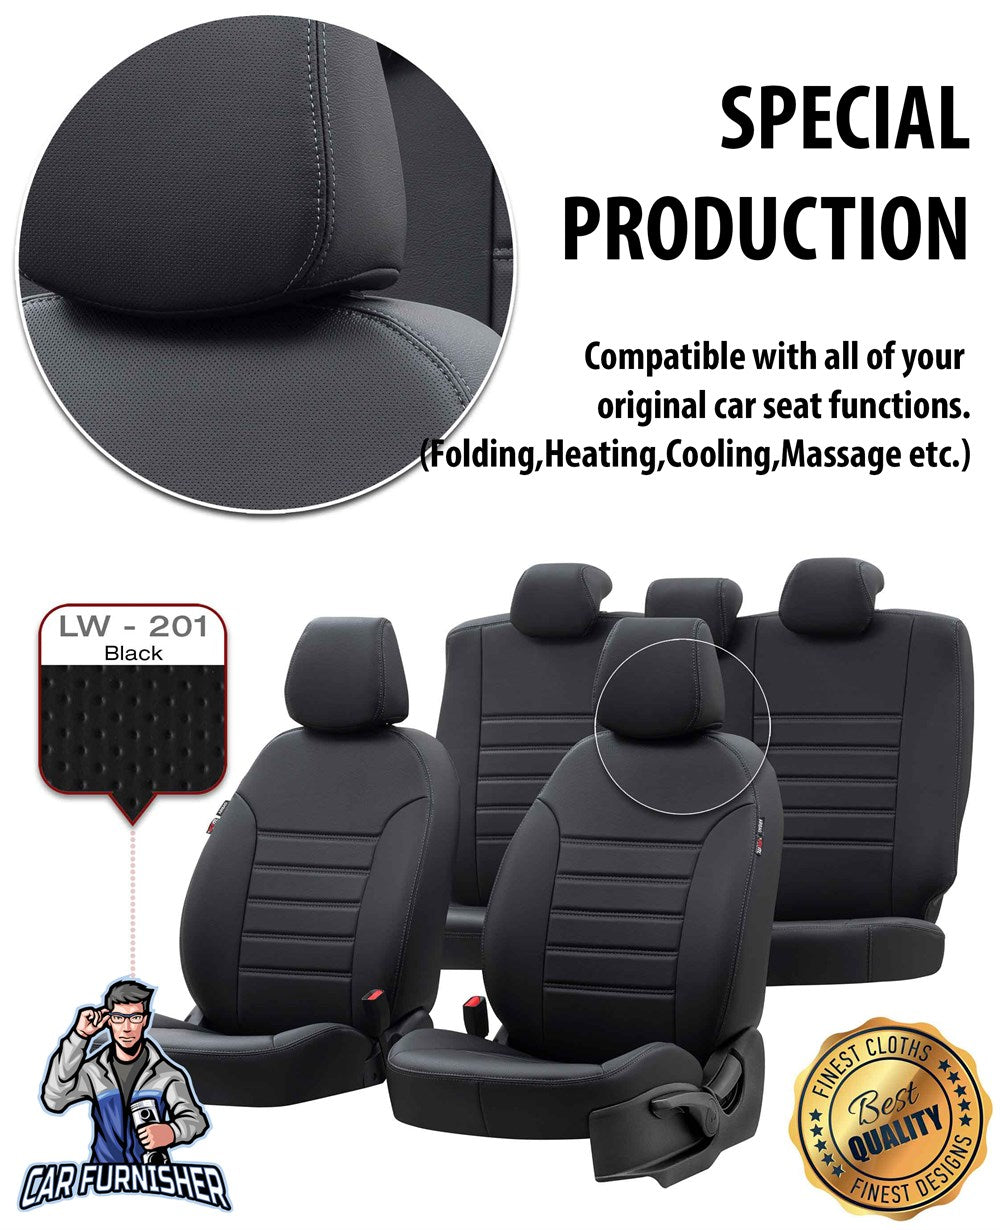 Mercedes CLS Seat Covers Istanbul Leather Design Black Leather